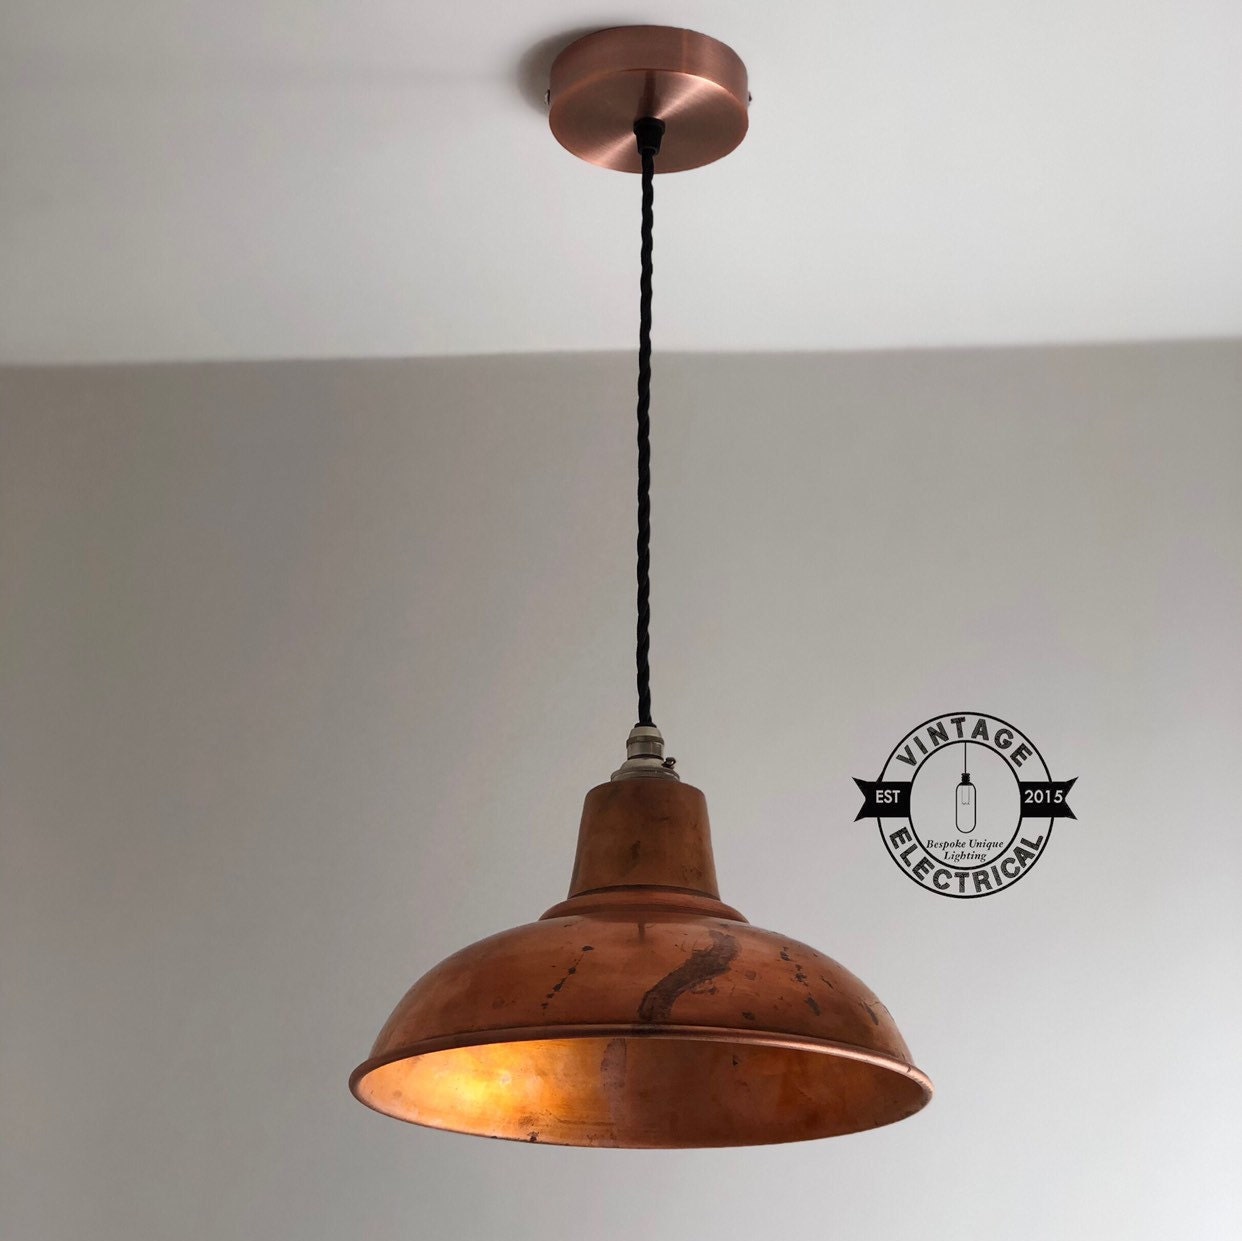 Salthouse ~ Solid Steel Industrial Shade Pendant Set Light | Ceiling Dining Room | Kitchen Table | Vintage Edison Filament Bulb | 10 Inch